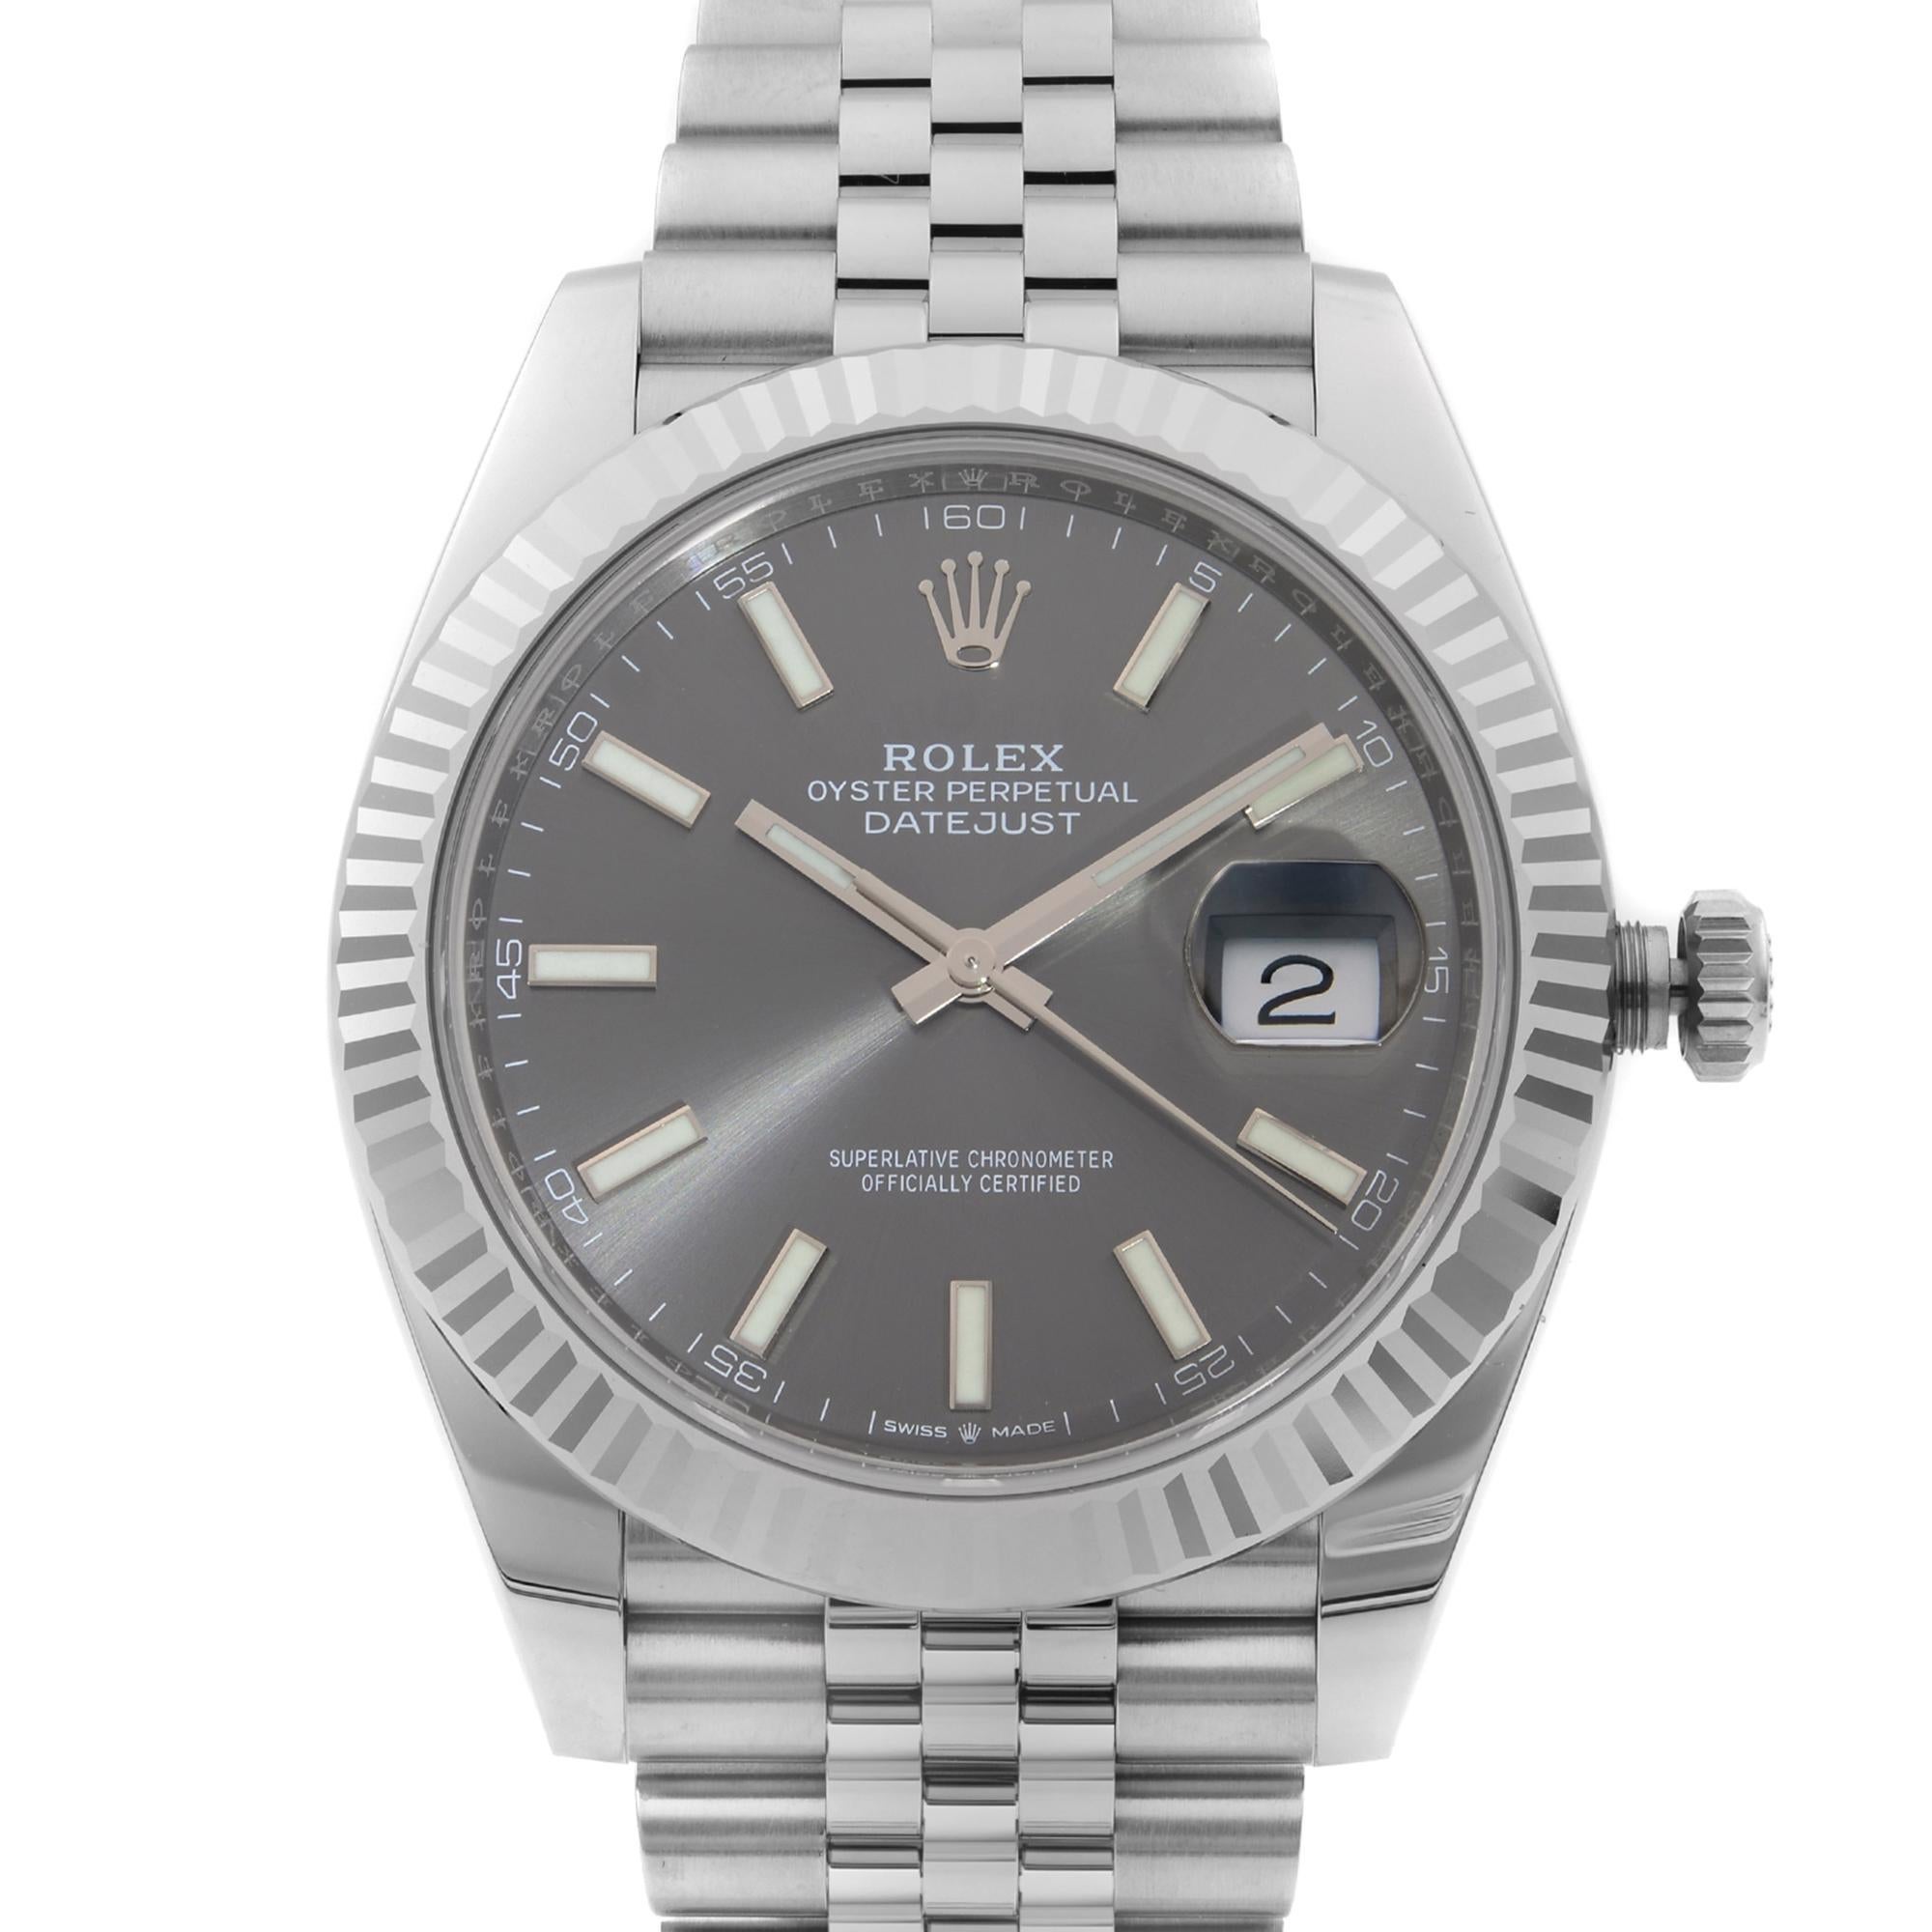 NEW. 2023 card. Comes with the original box and papers. Covered by a 5-year warranty.

Brand & Model:
Brand: Rolex
Model: Rolex Datejust 126334
Model Number: 126334

General Specifications:
Type: Wristwatch
Department: Men
Country/Region of